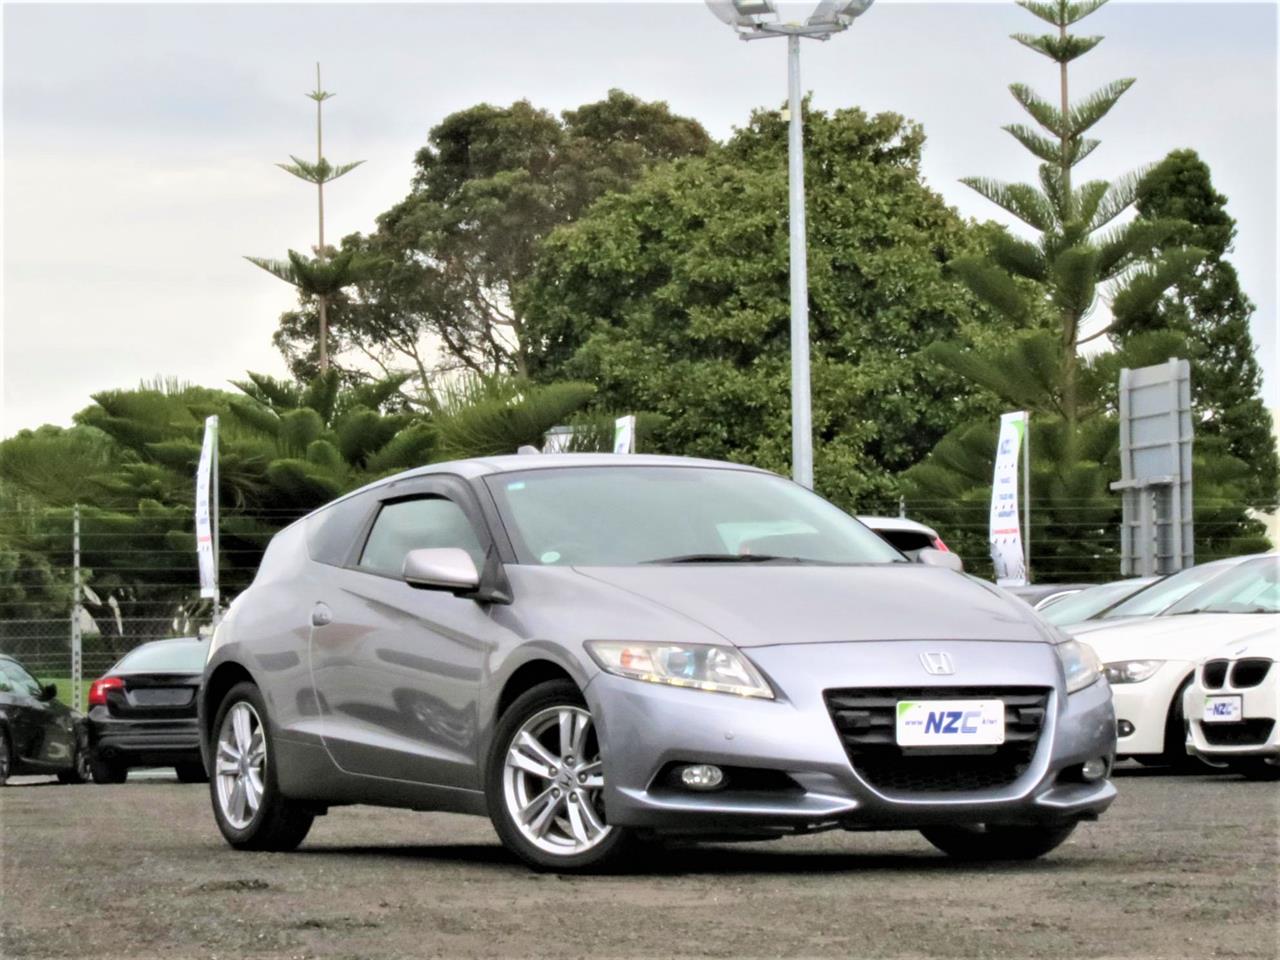 NZC 2011 Honda CR-Z just arrived to Auckland